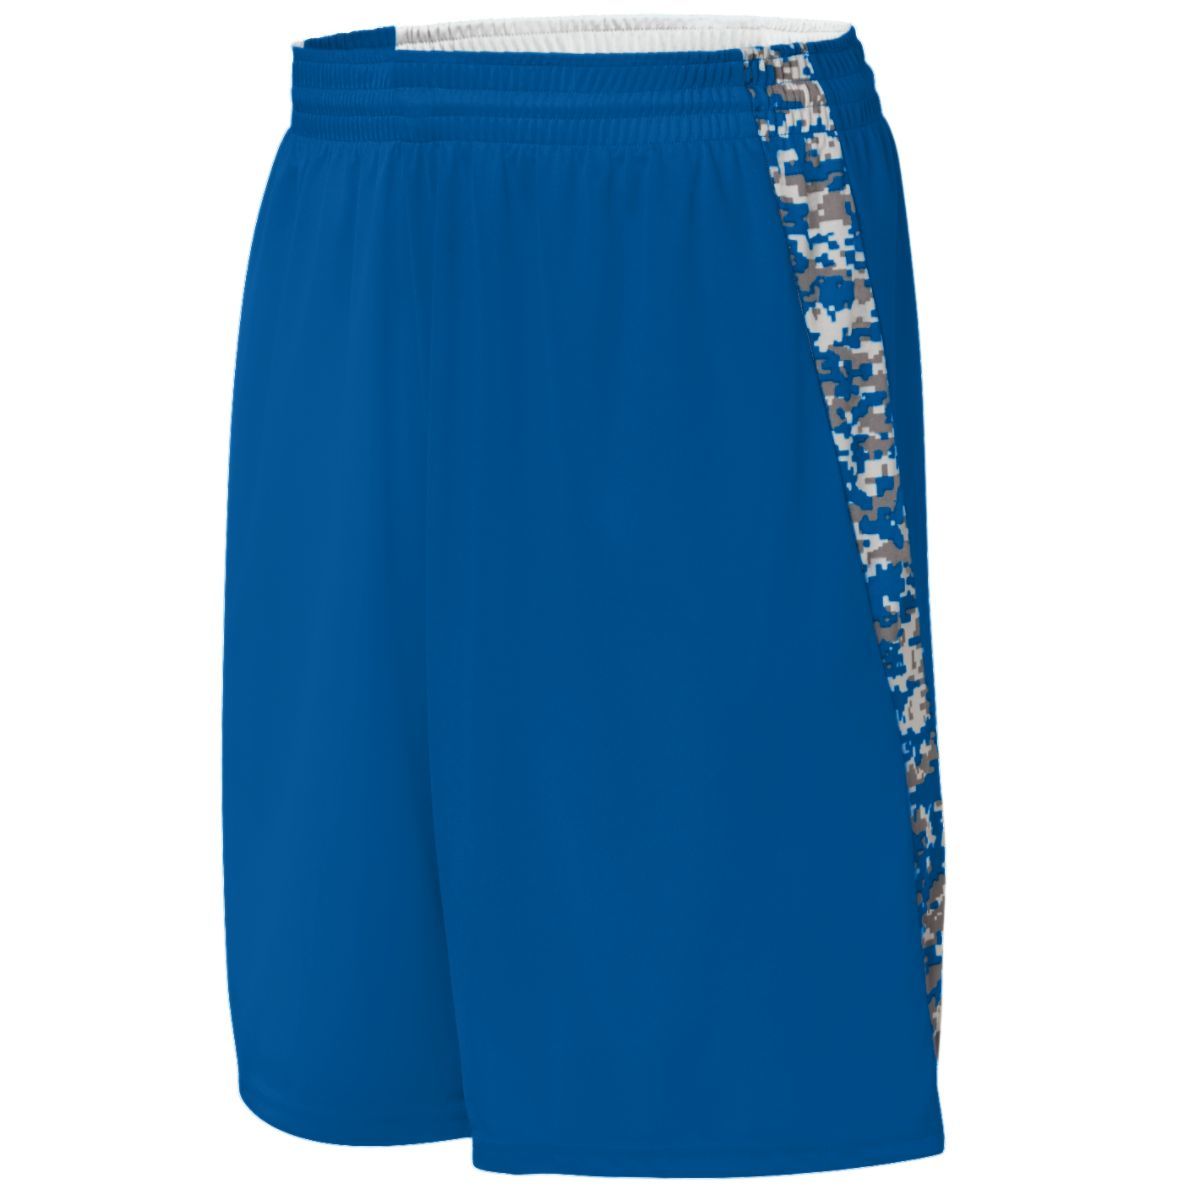 Augusta Sportswear Youth Hook Shot Reversible Shorts in Royal/Royal Digi  -Part of the Youth, Youth-Shorts, Augusta-Products, Basketball, All-Sports, All-Sports-1 product lines at KanaleyCreations.com